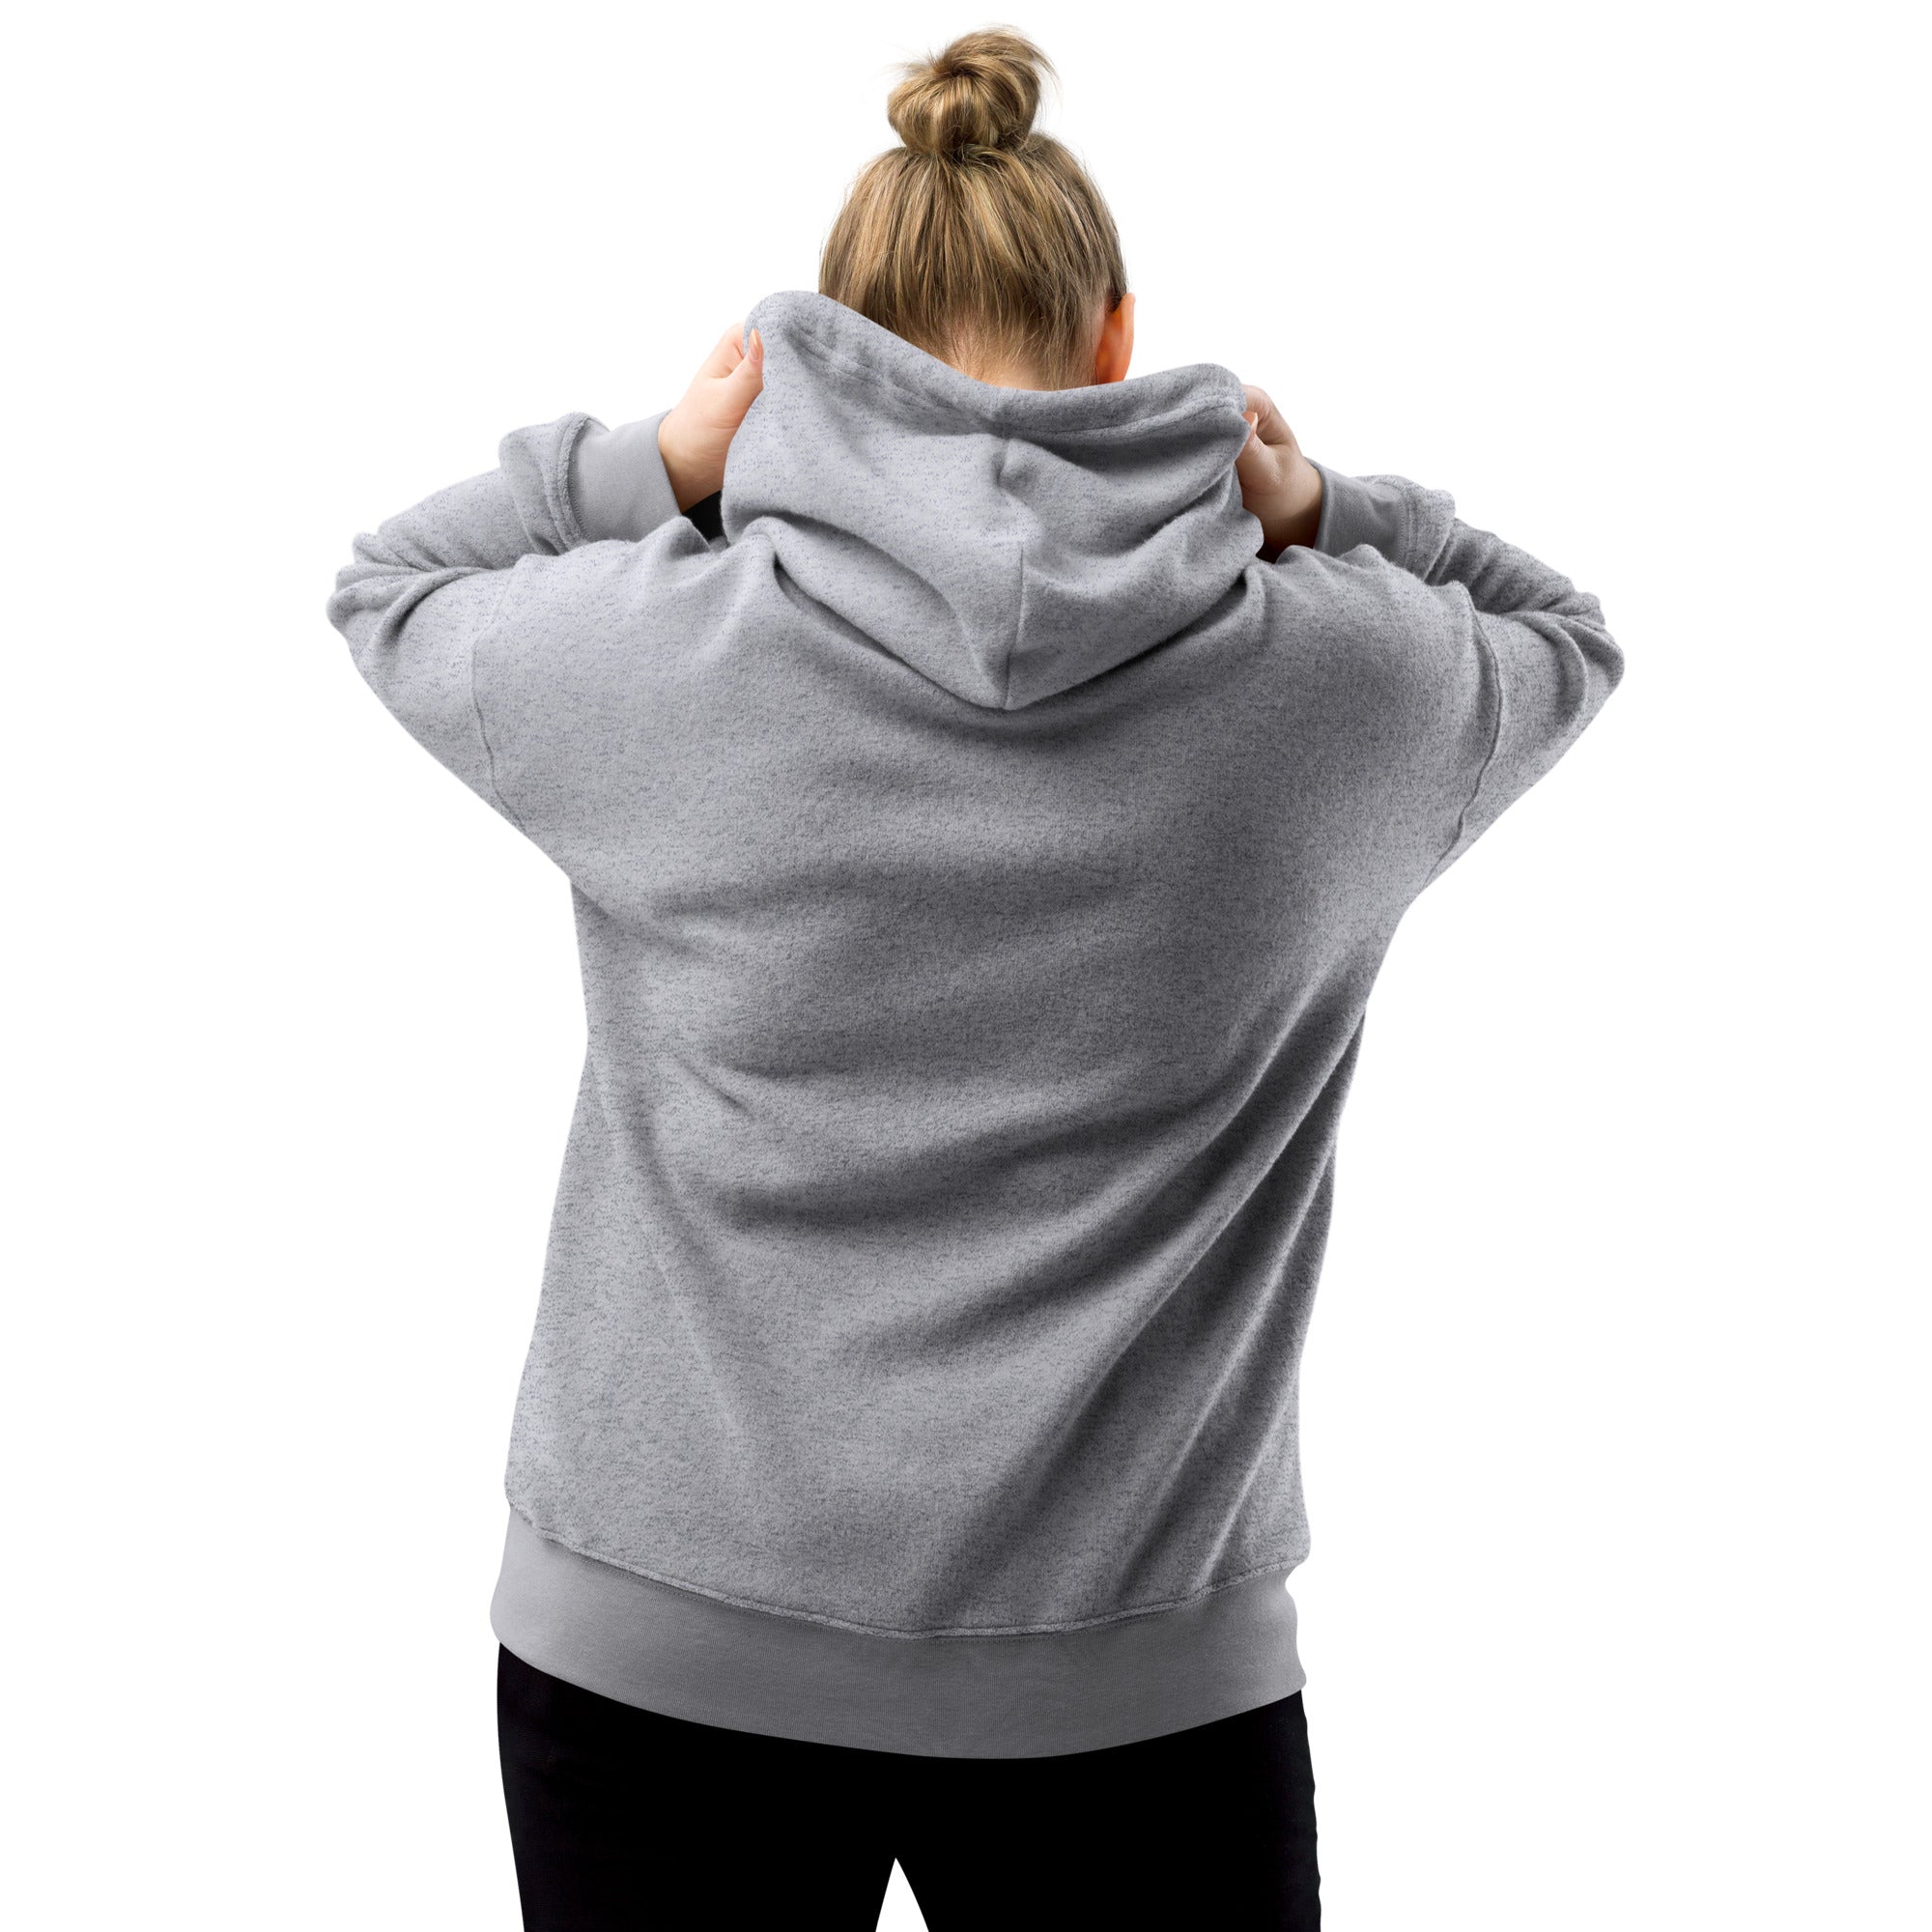 Unisex sueded fleece yoga hoodie - Personal Hour for Yoga and Meditations 